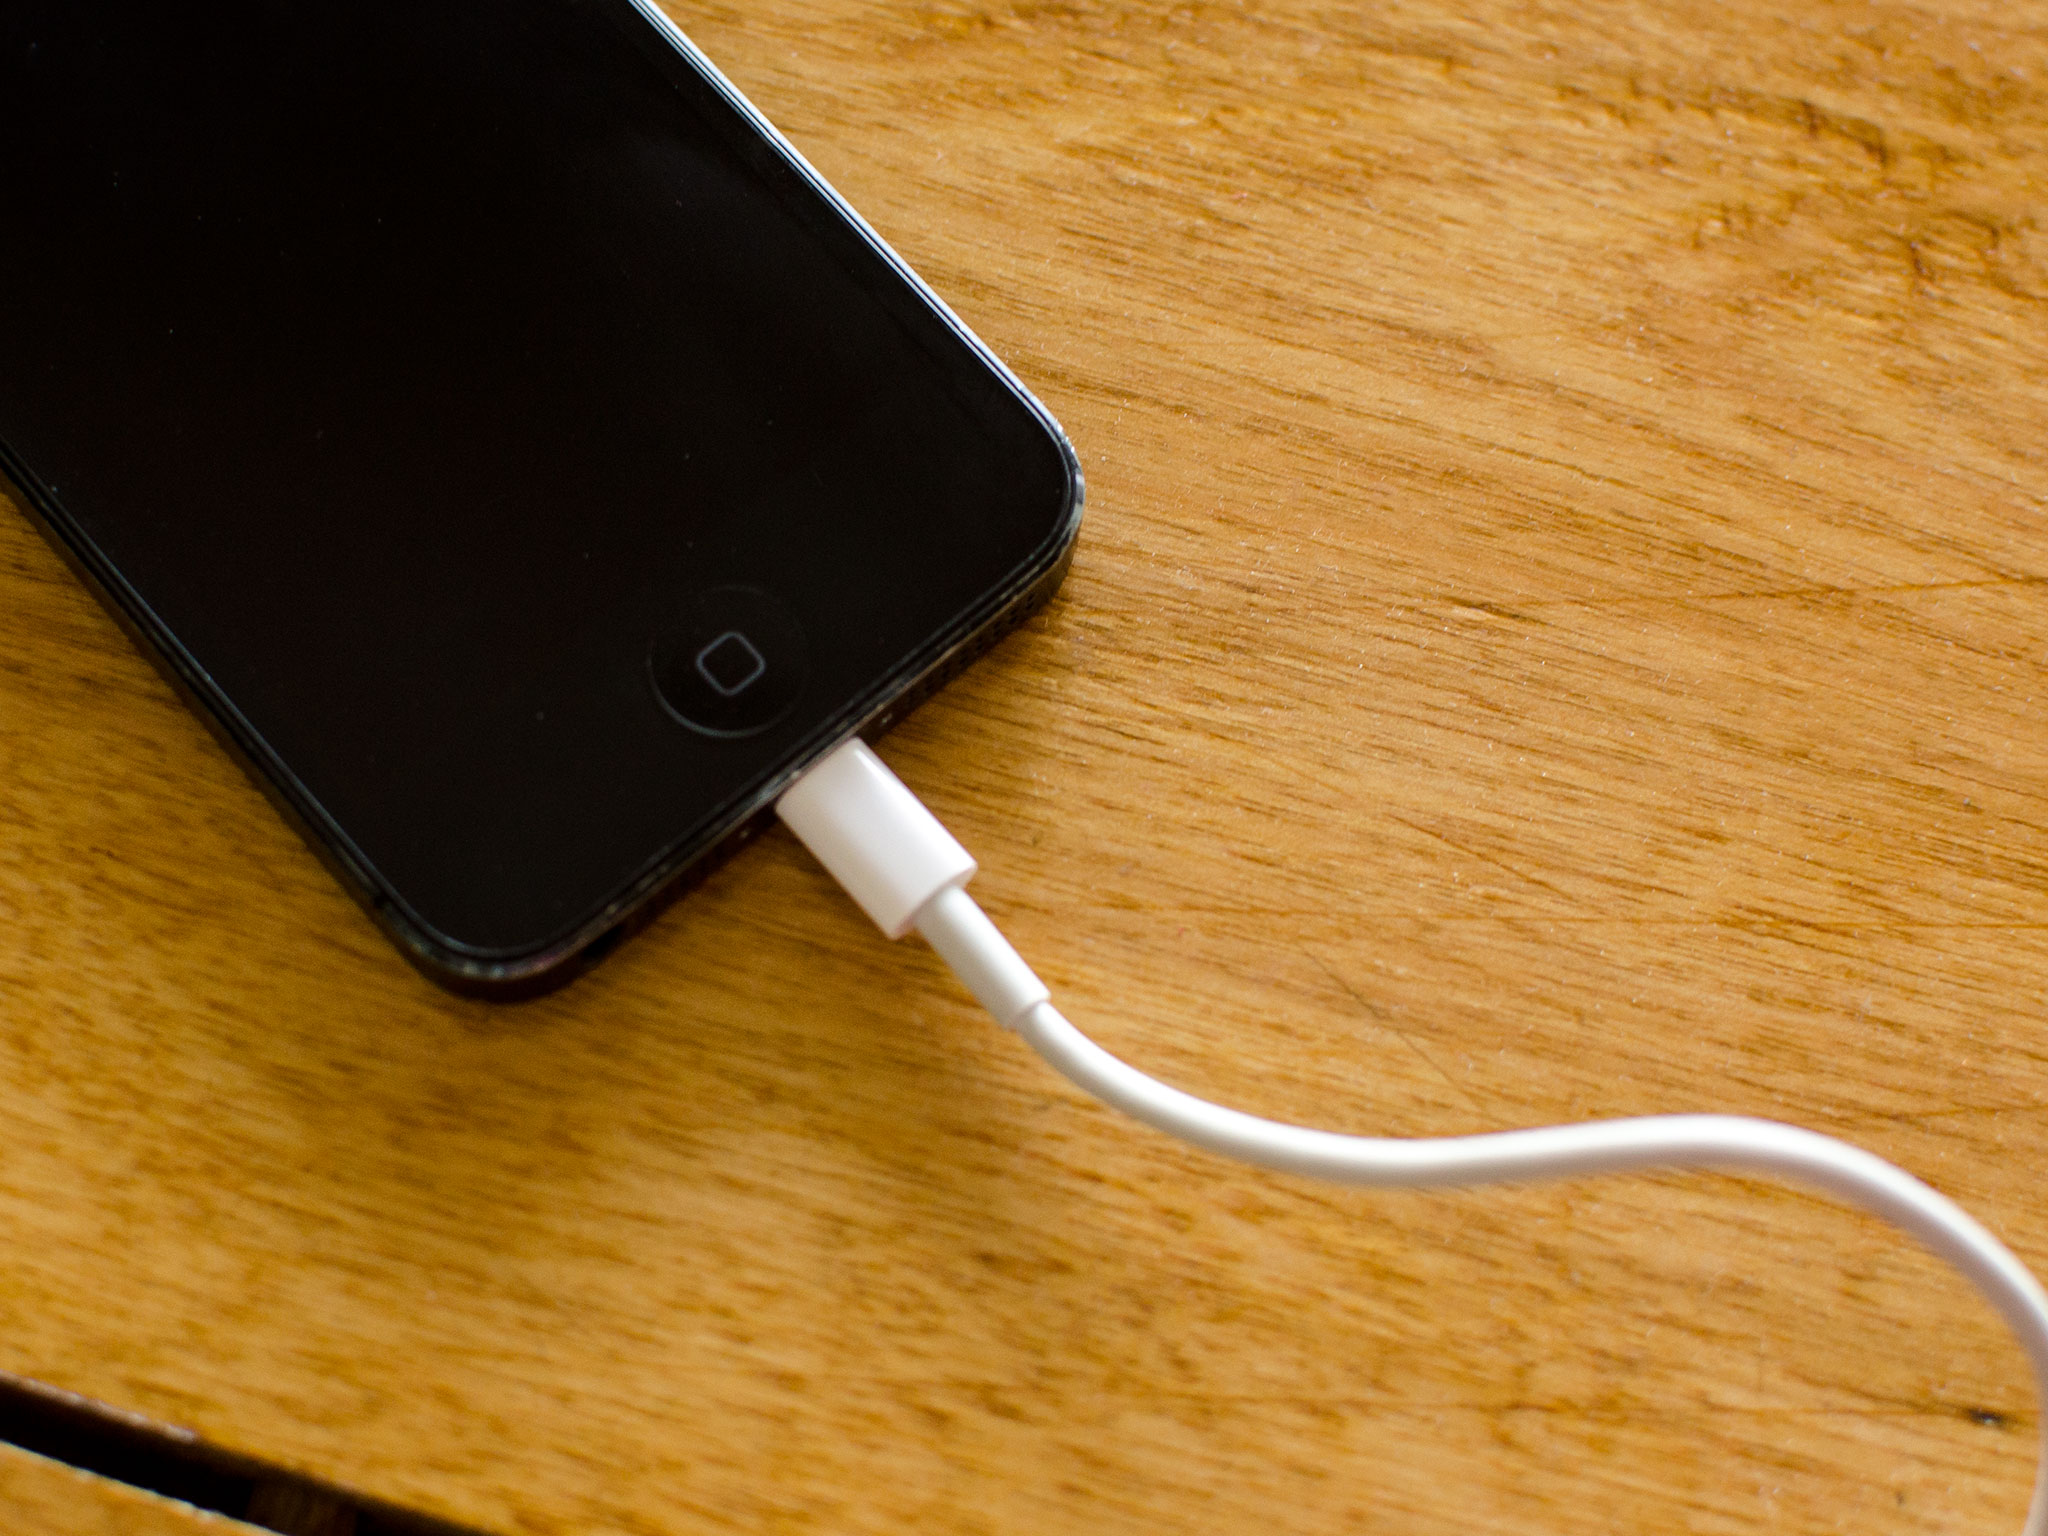 How to fix a broken charge port or headphone jack in an iPhone 5